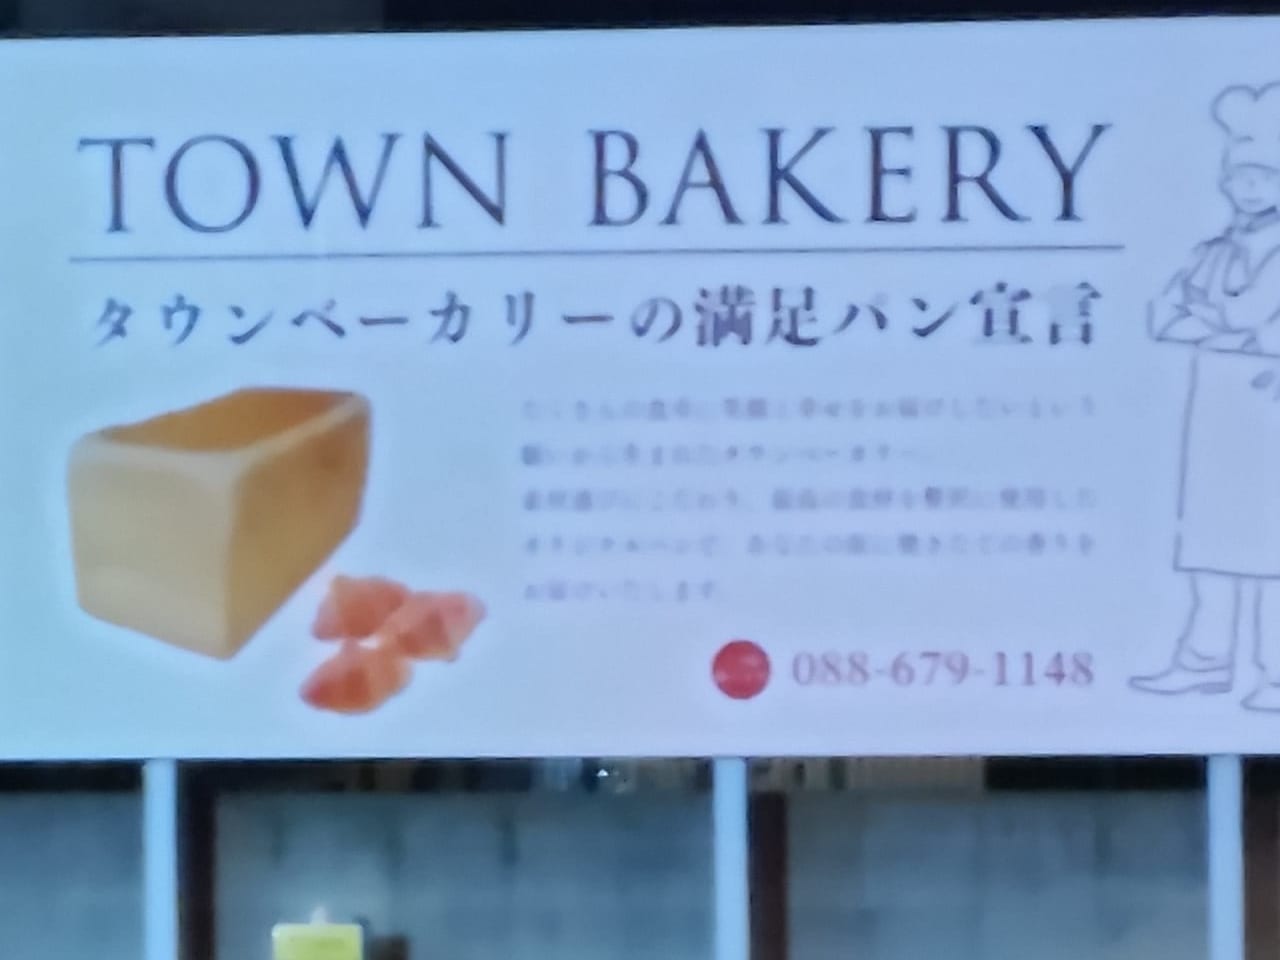 「TOWN BAKERY 藍住店」の看板。画像提供：「123」様。